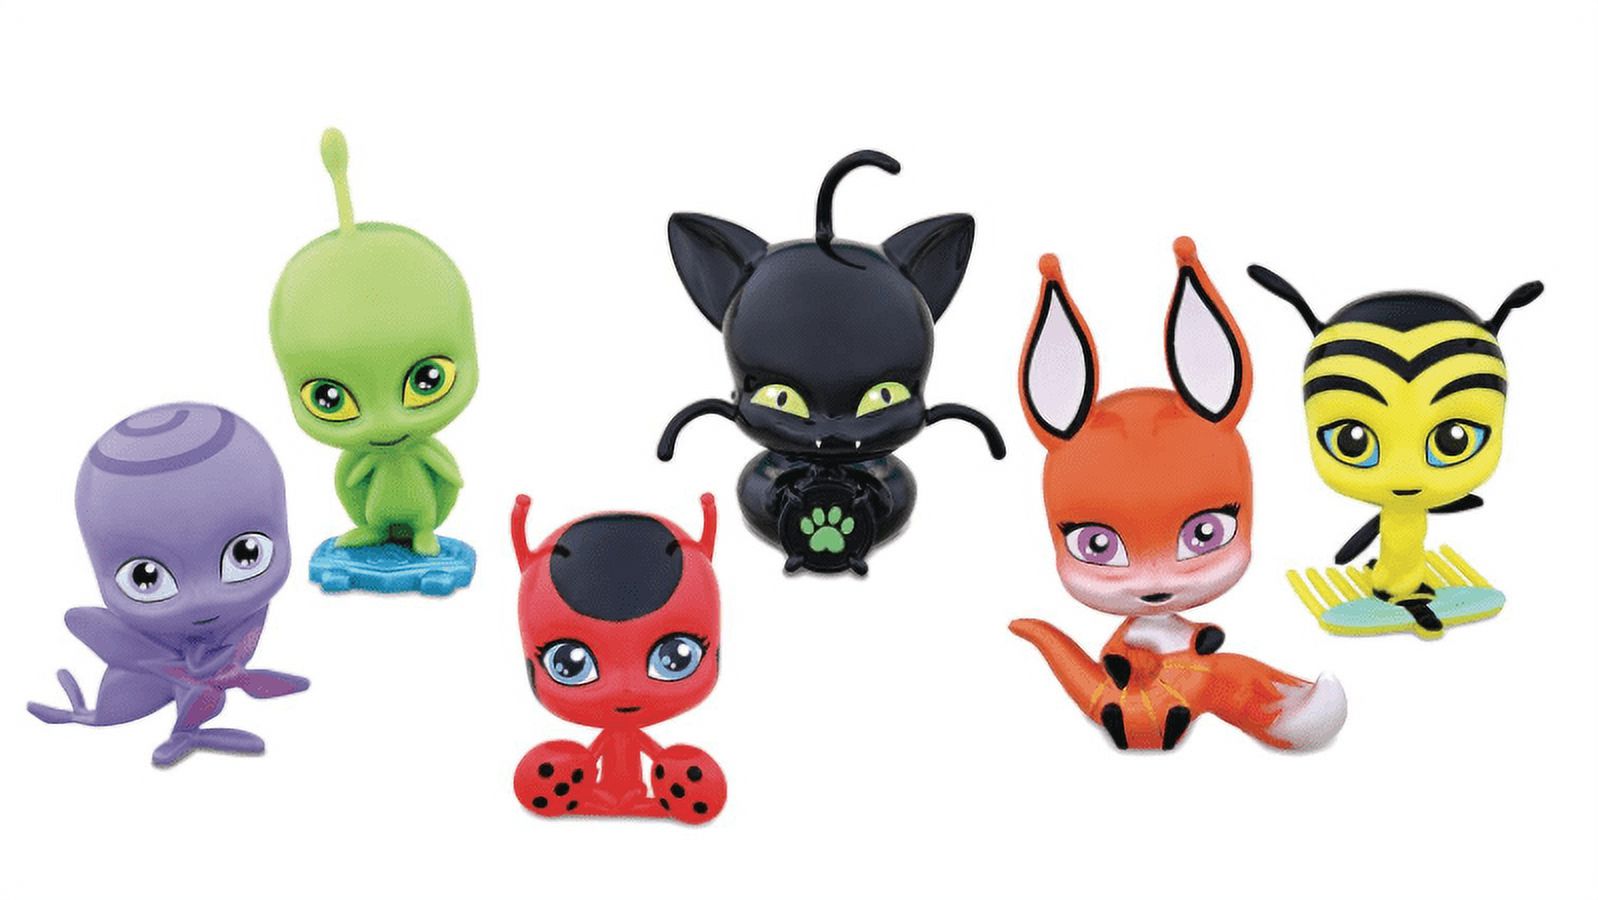 Miraculous Miracle Box Kwami Surprise - Blind Box - One of 6 Characters  (Wayzz, Tikki, Trixx, Plagg, Pollen, Nooroo) - Which Kwami Power Will you  unbox? 